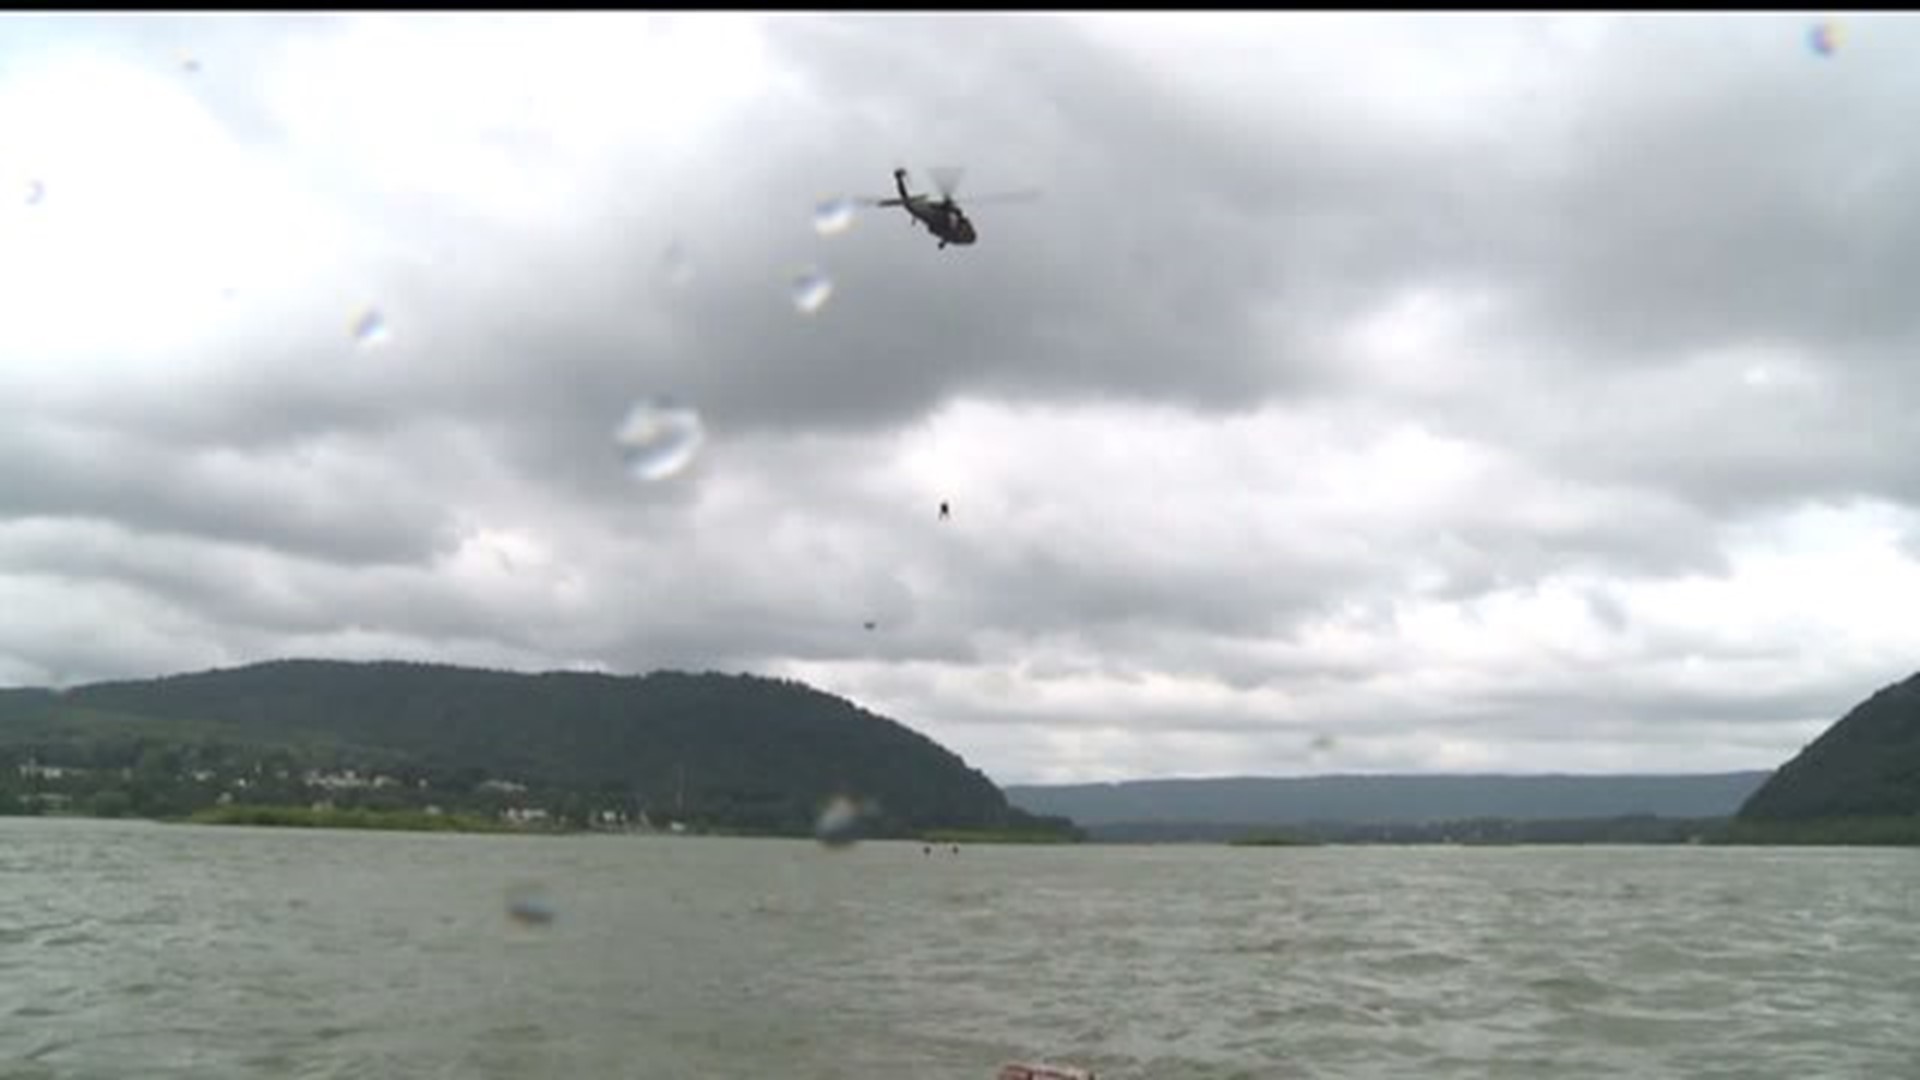 Blackhawk helicopters used during training in Susquehanna River